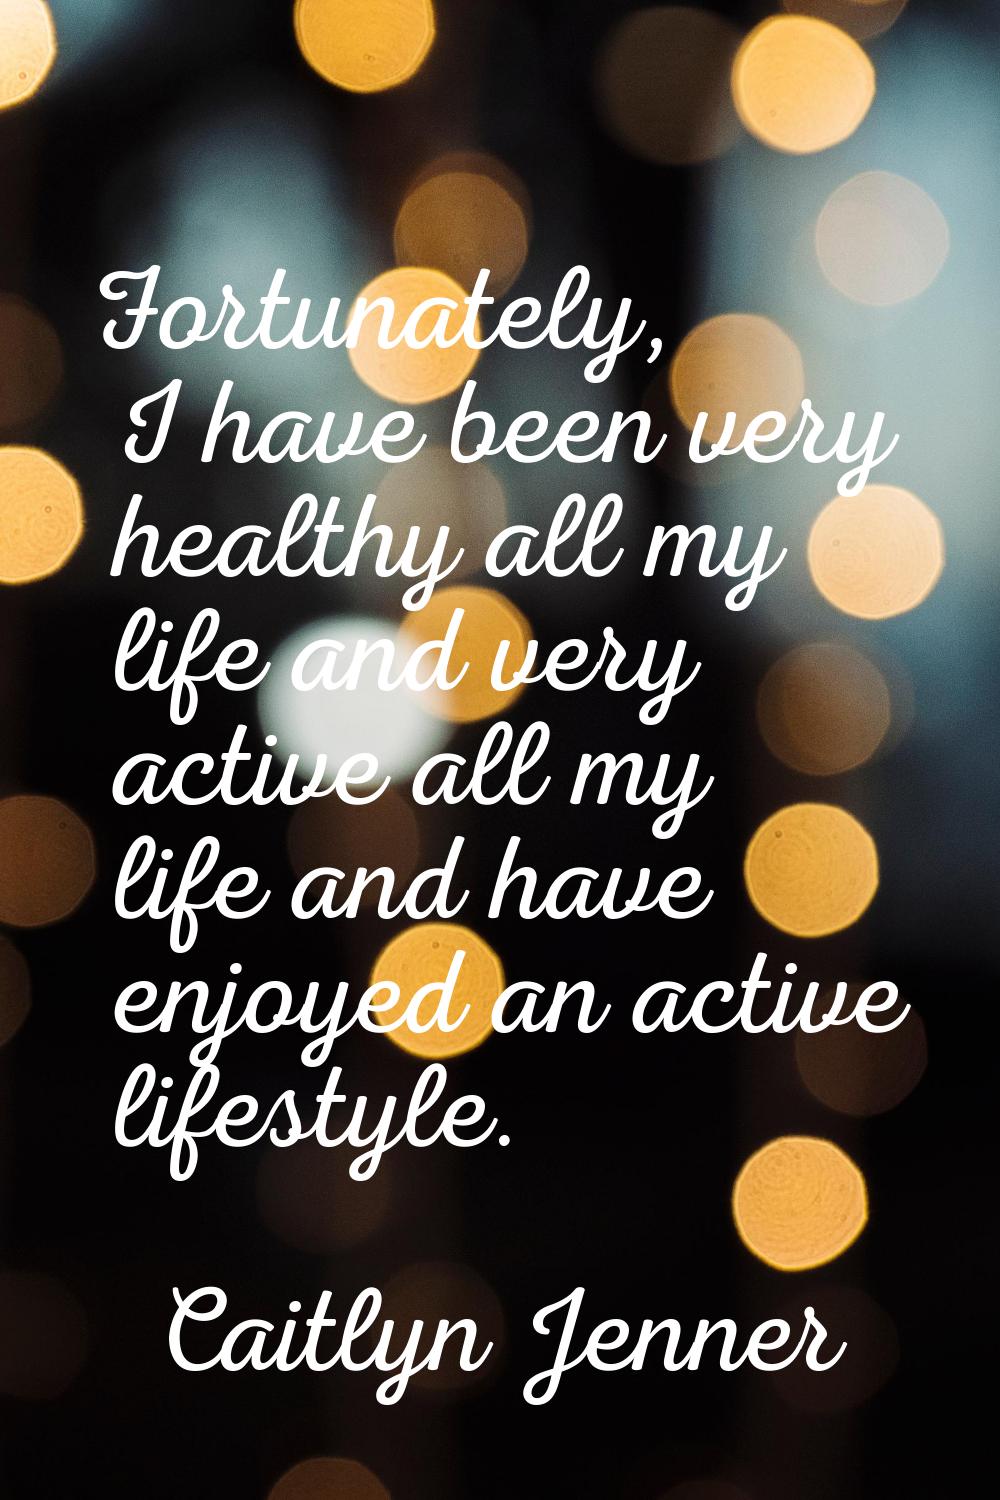 Fortunately, I have been very healthy all my life and very active all my life and have enjoyed an a